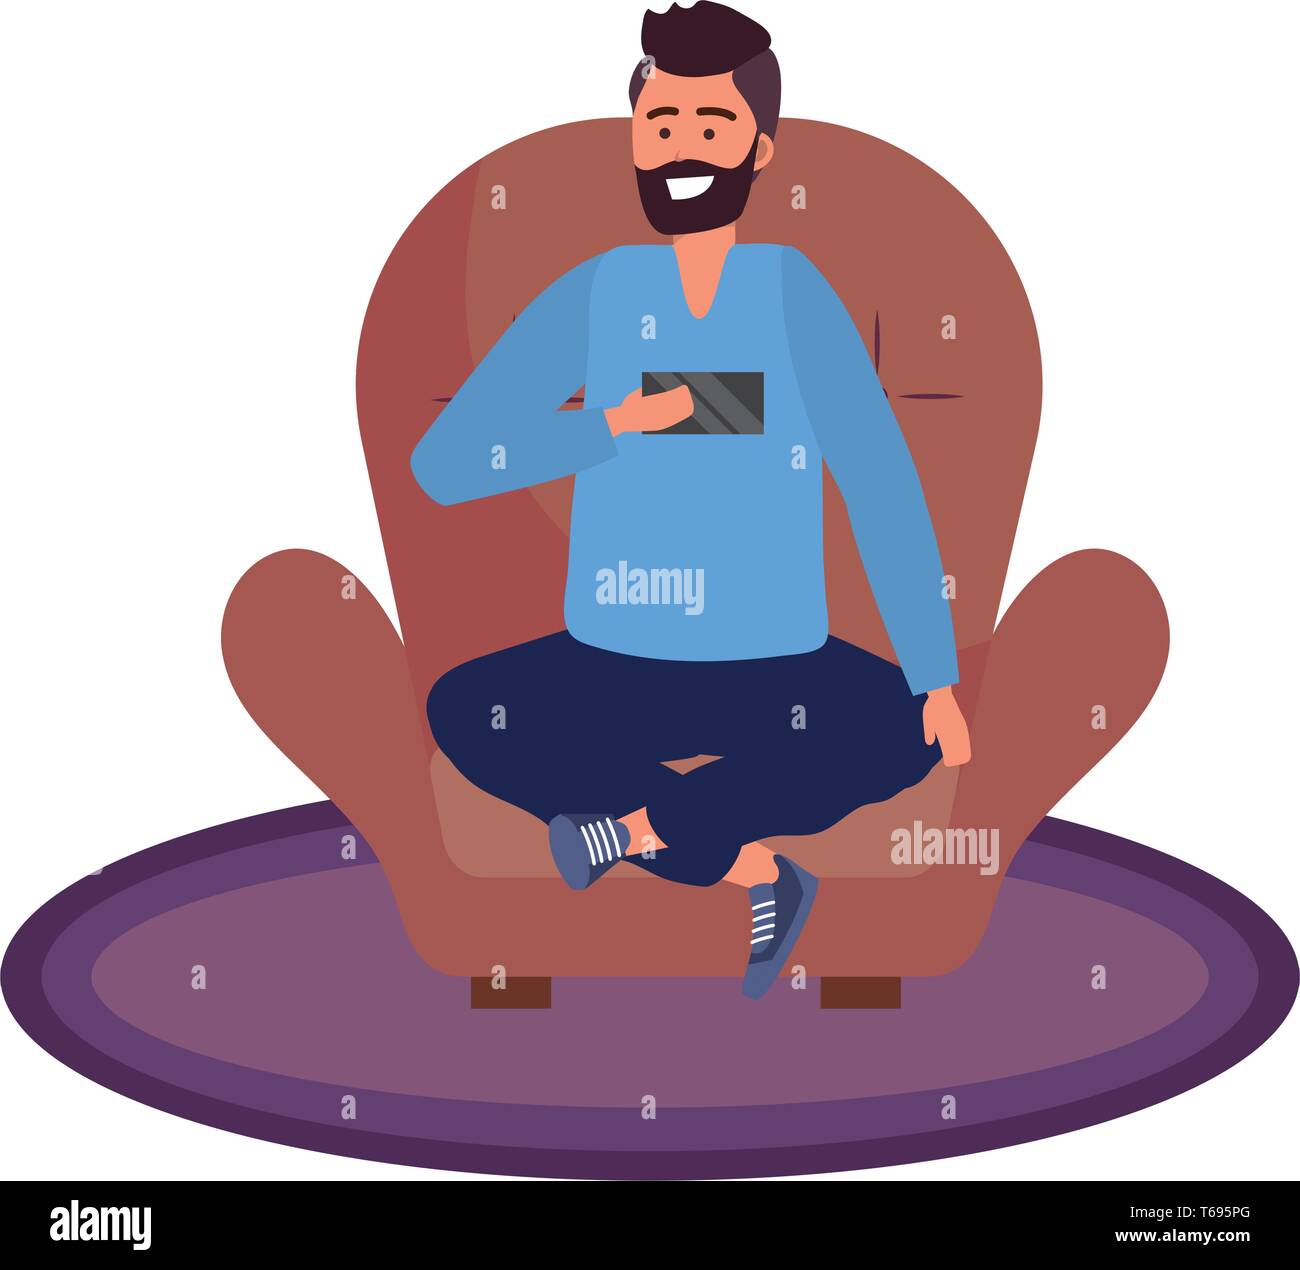 Millennial person stylish outfit sitting in couch taking selfie texting bearded caucasian  vector illustration graphic design Stock Vector